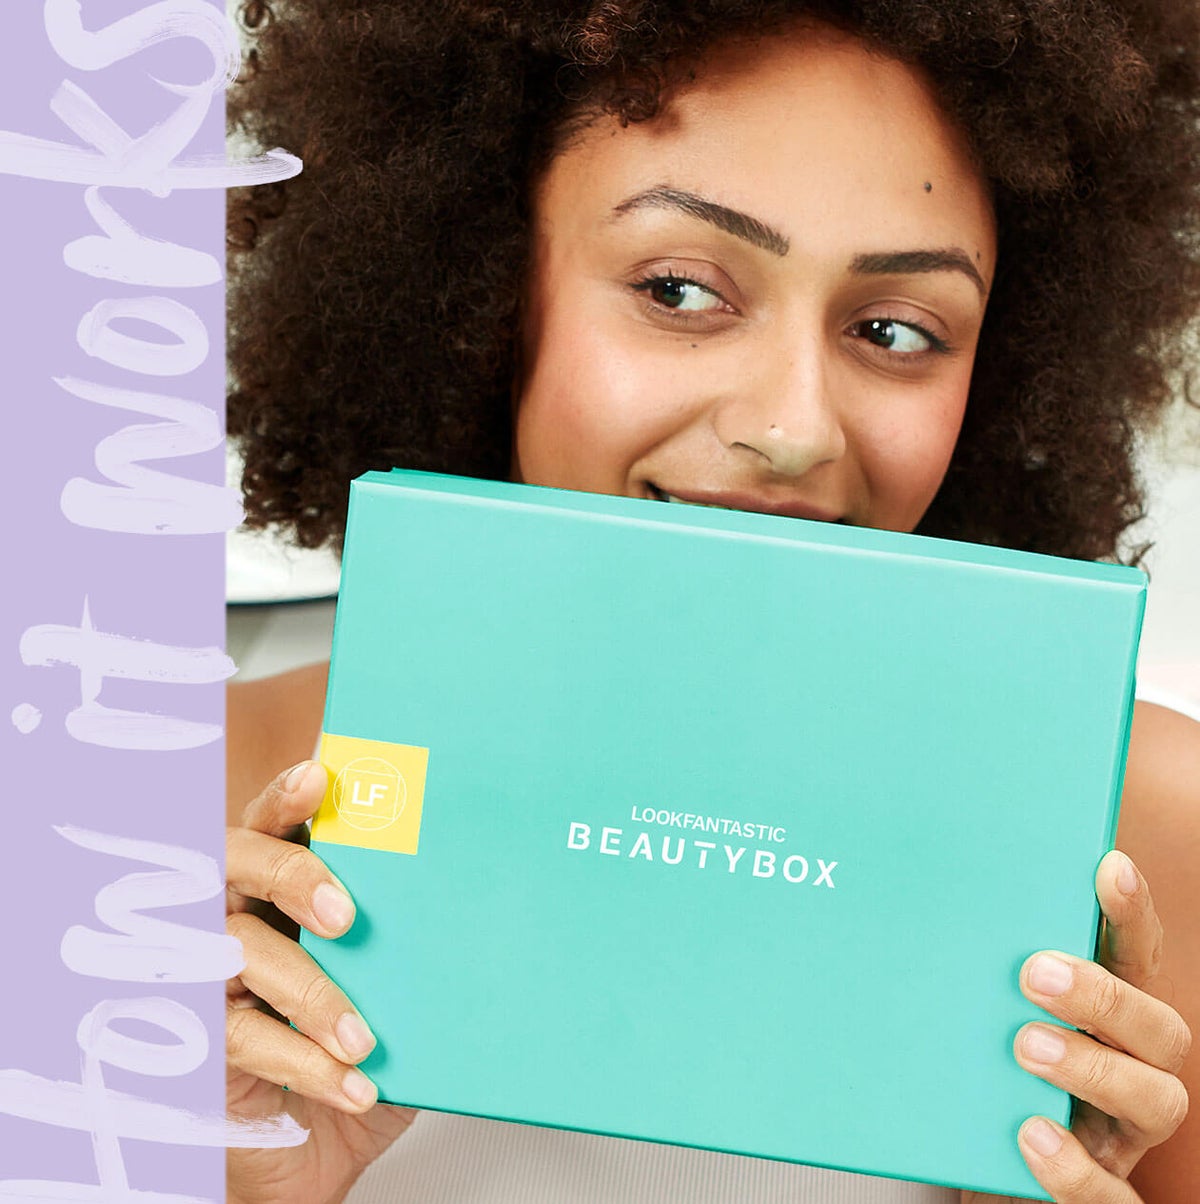 Learn more about the <b>lookfantastic Beauty Box</b>, a monthly subscription that delivers 6 curated beauty products worth over $80 to a global community of subscribers.<br><br>Discover a subscription that works for you from our 1, 3, 6 or 12 month plans.